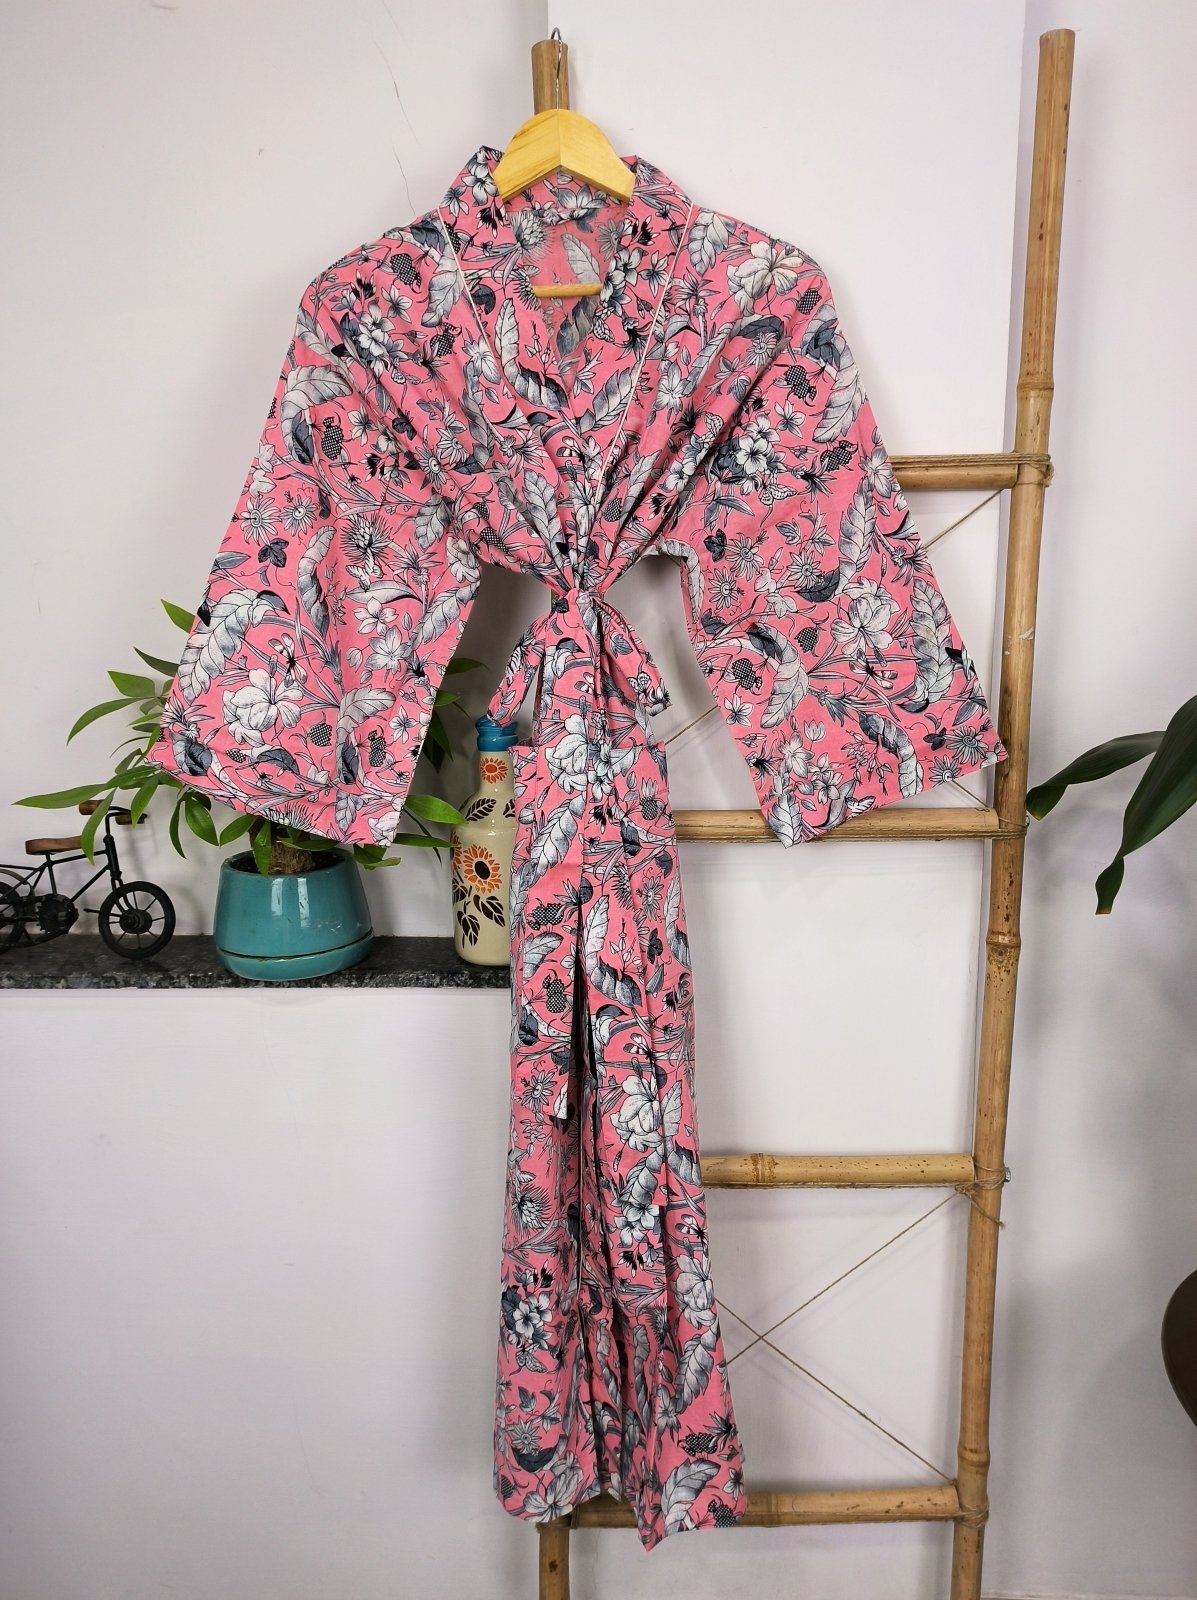 Pure Cotton Kimono Indian Handprinted Boho House Robe Summer Dress | Pink White Botanical Garden Floral Luxury Beach Holiday Yacht Cover Up - The Eastern Loom